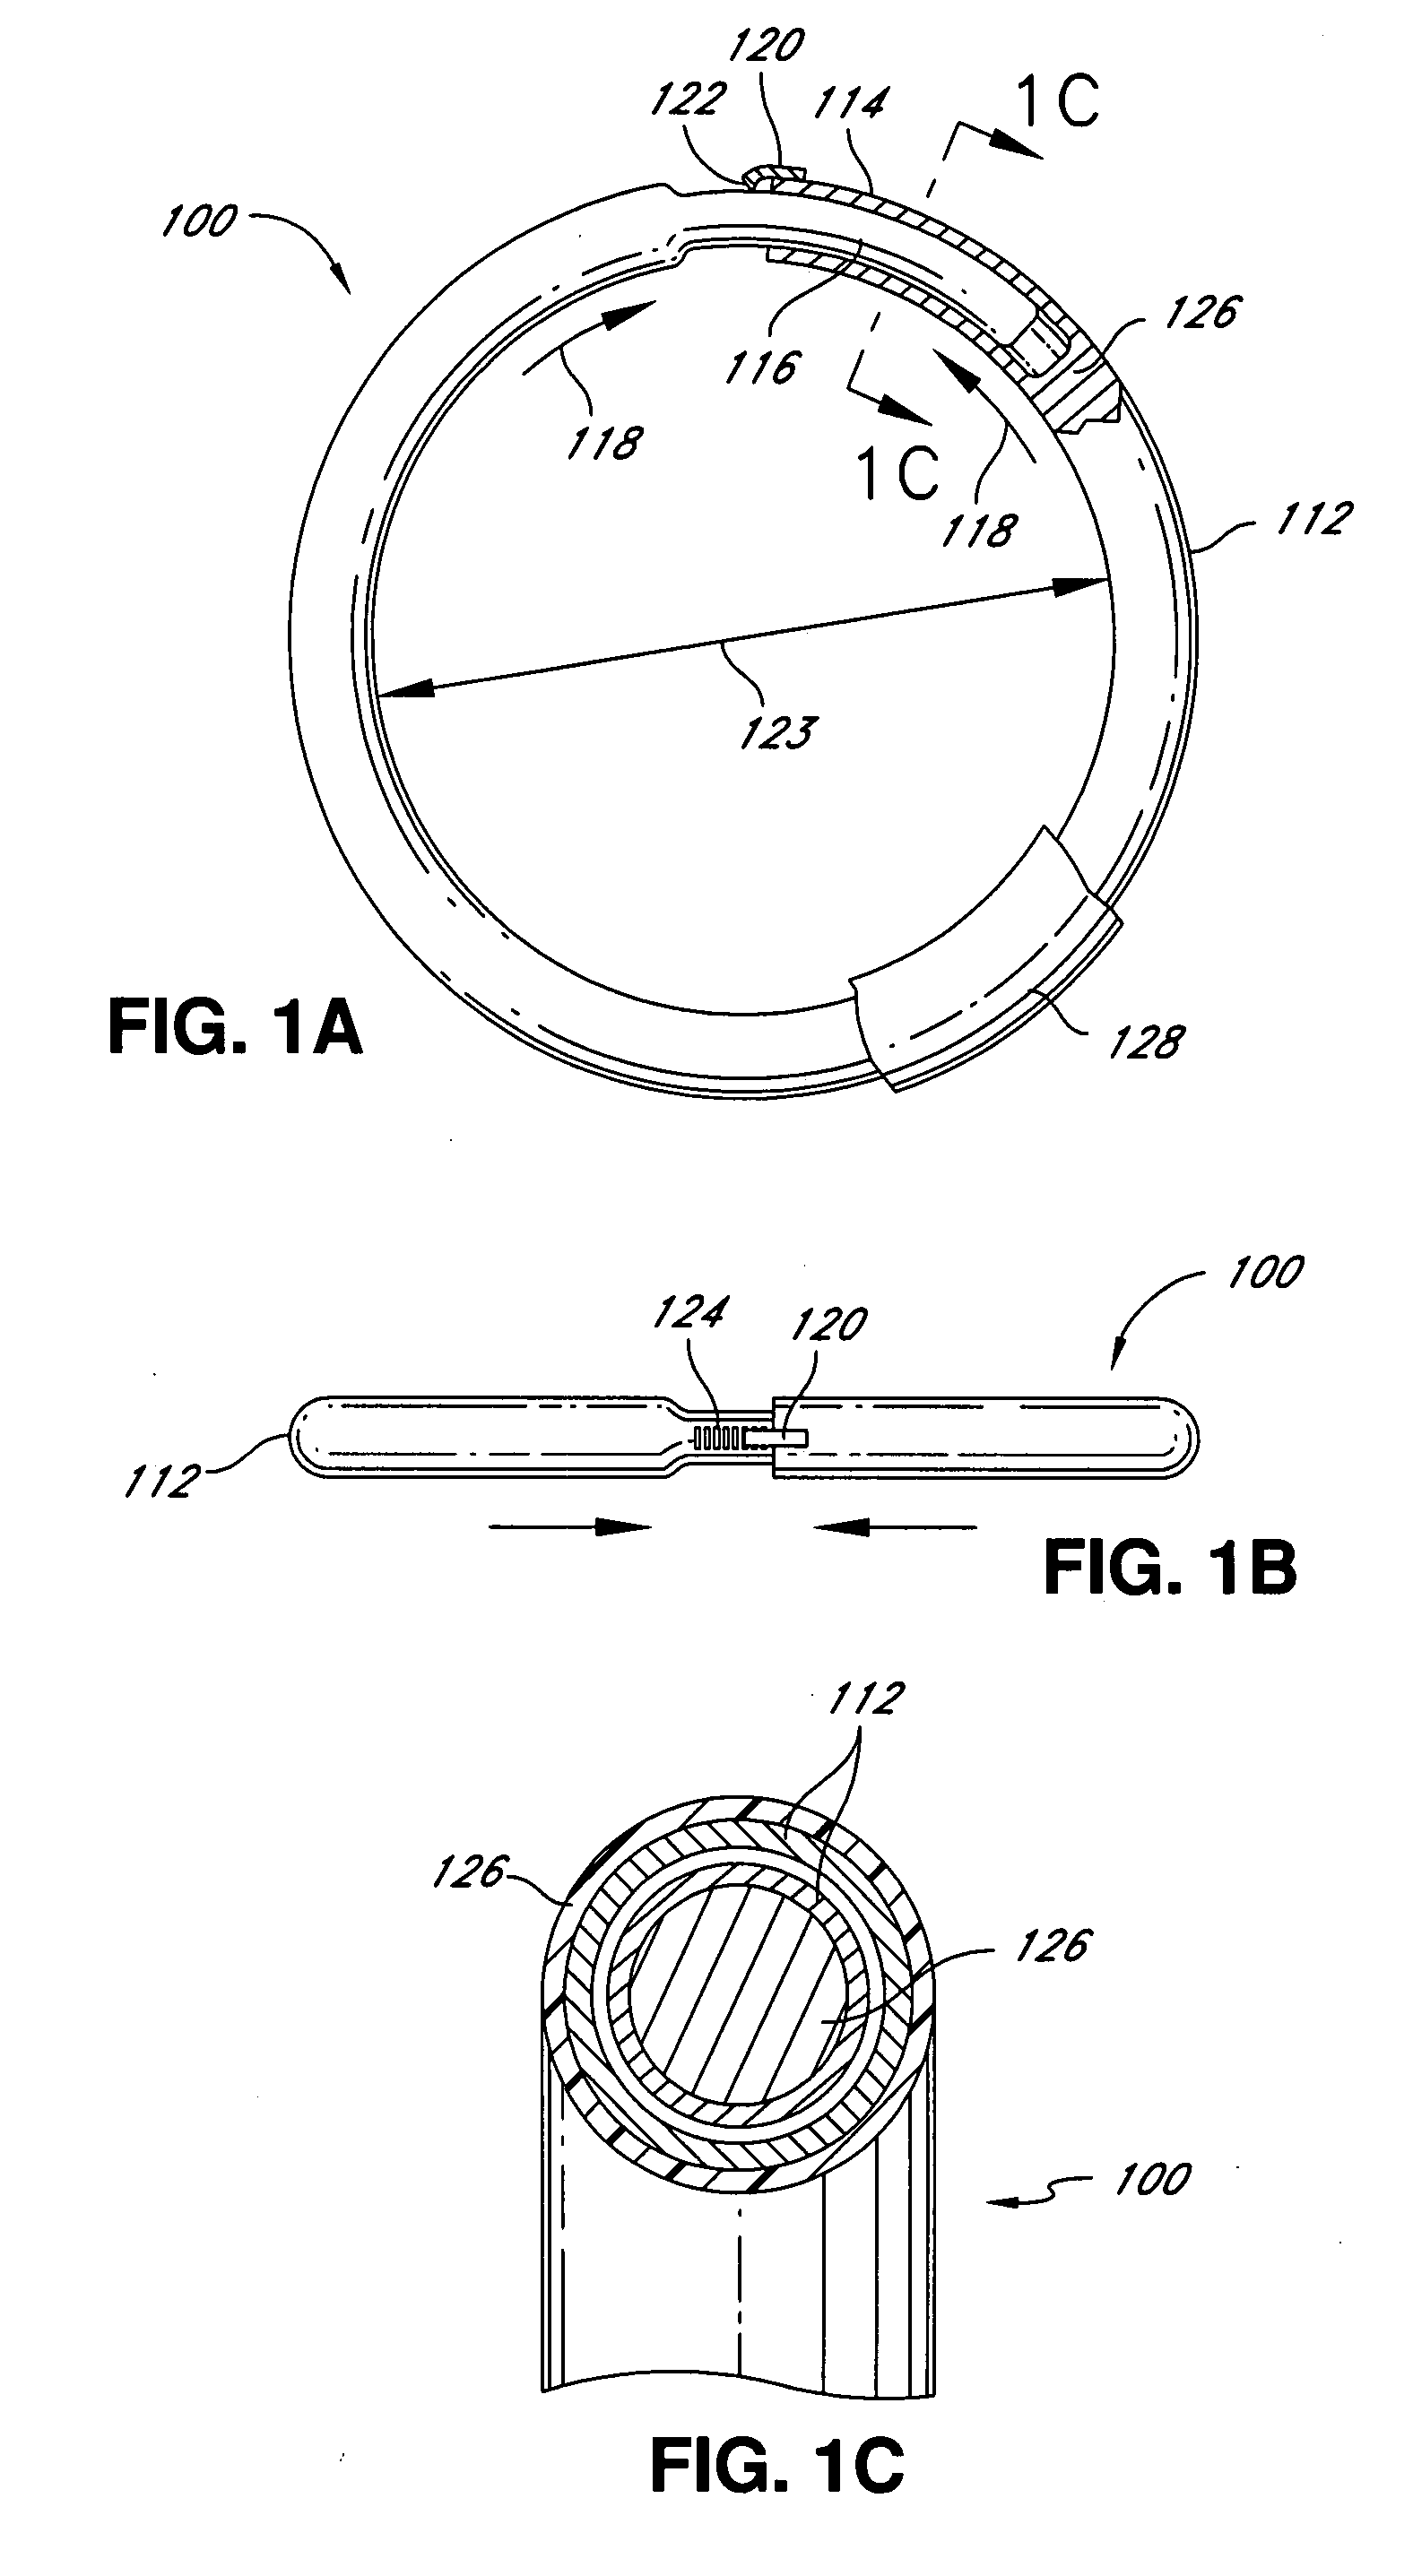 Intraoperative and post-operative adjustment of an annuloplasty ring